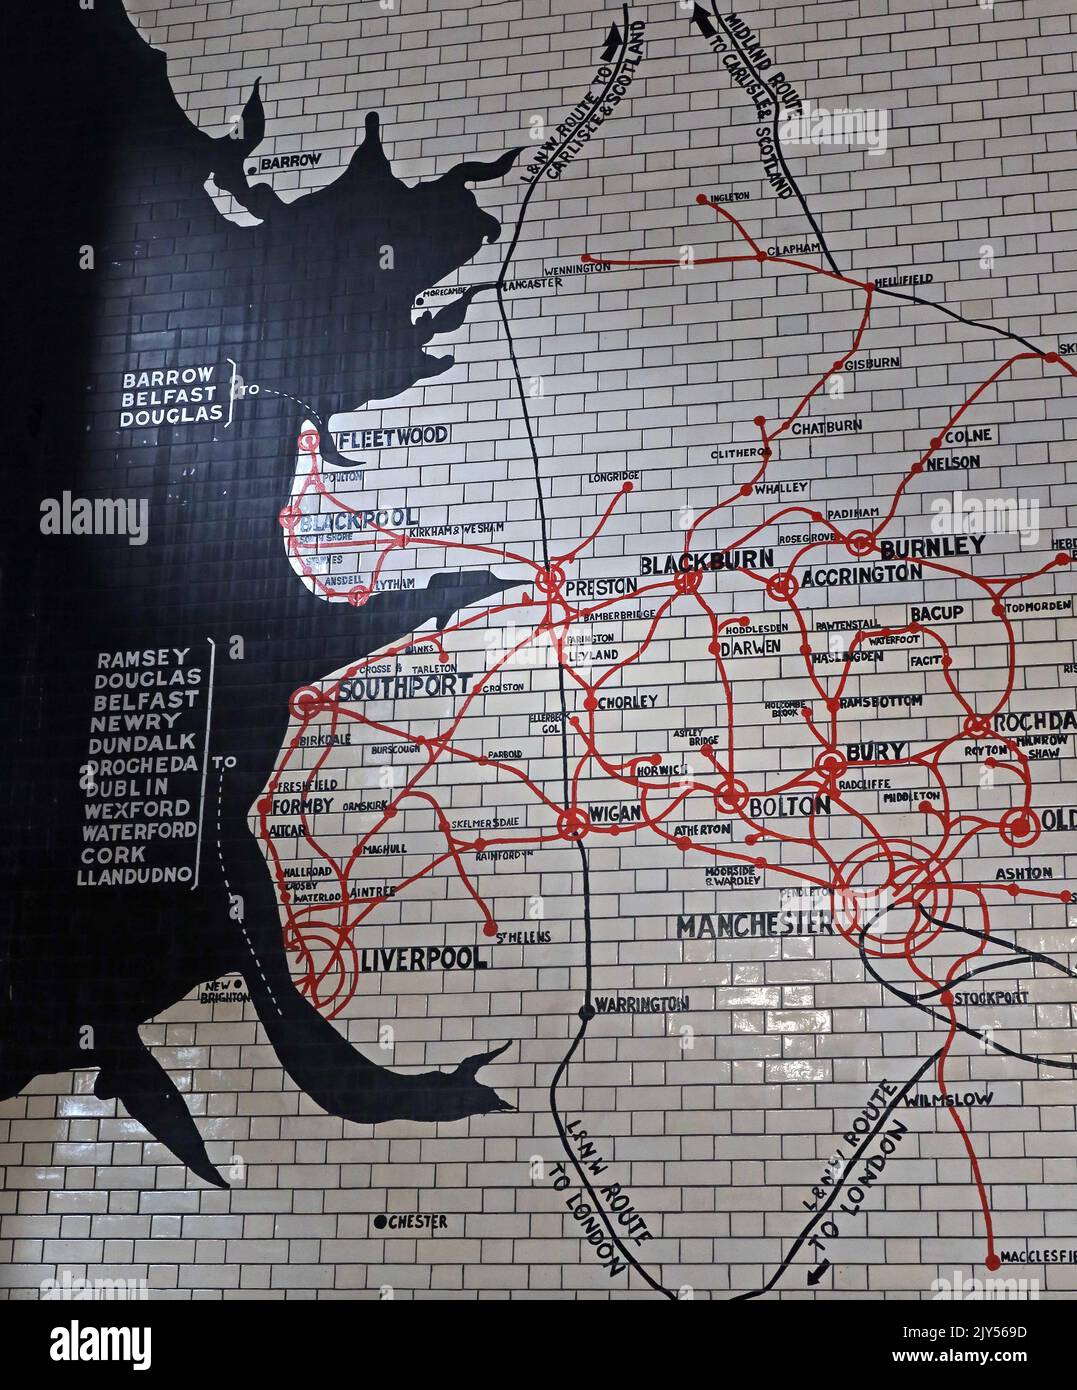 NW rail route map in tiles, Victoria Railway Station, Manchester, England, UK, M3 1WY - NW routes,Wilmslow,Liverpool,Fleetwood,Preston,Burnley,Oldham Stock Photo